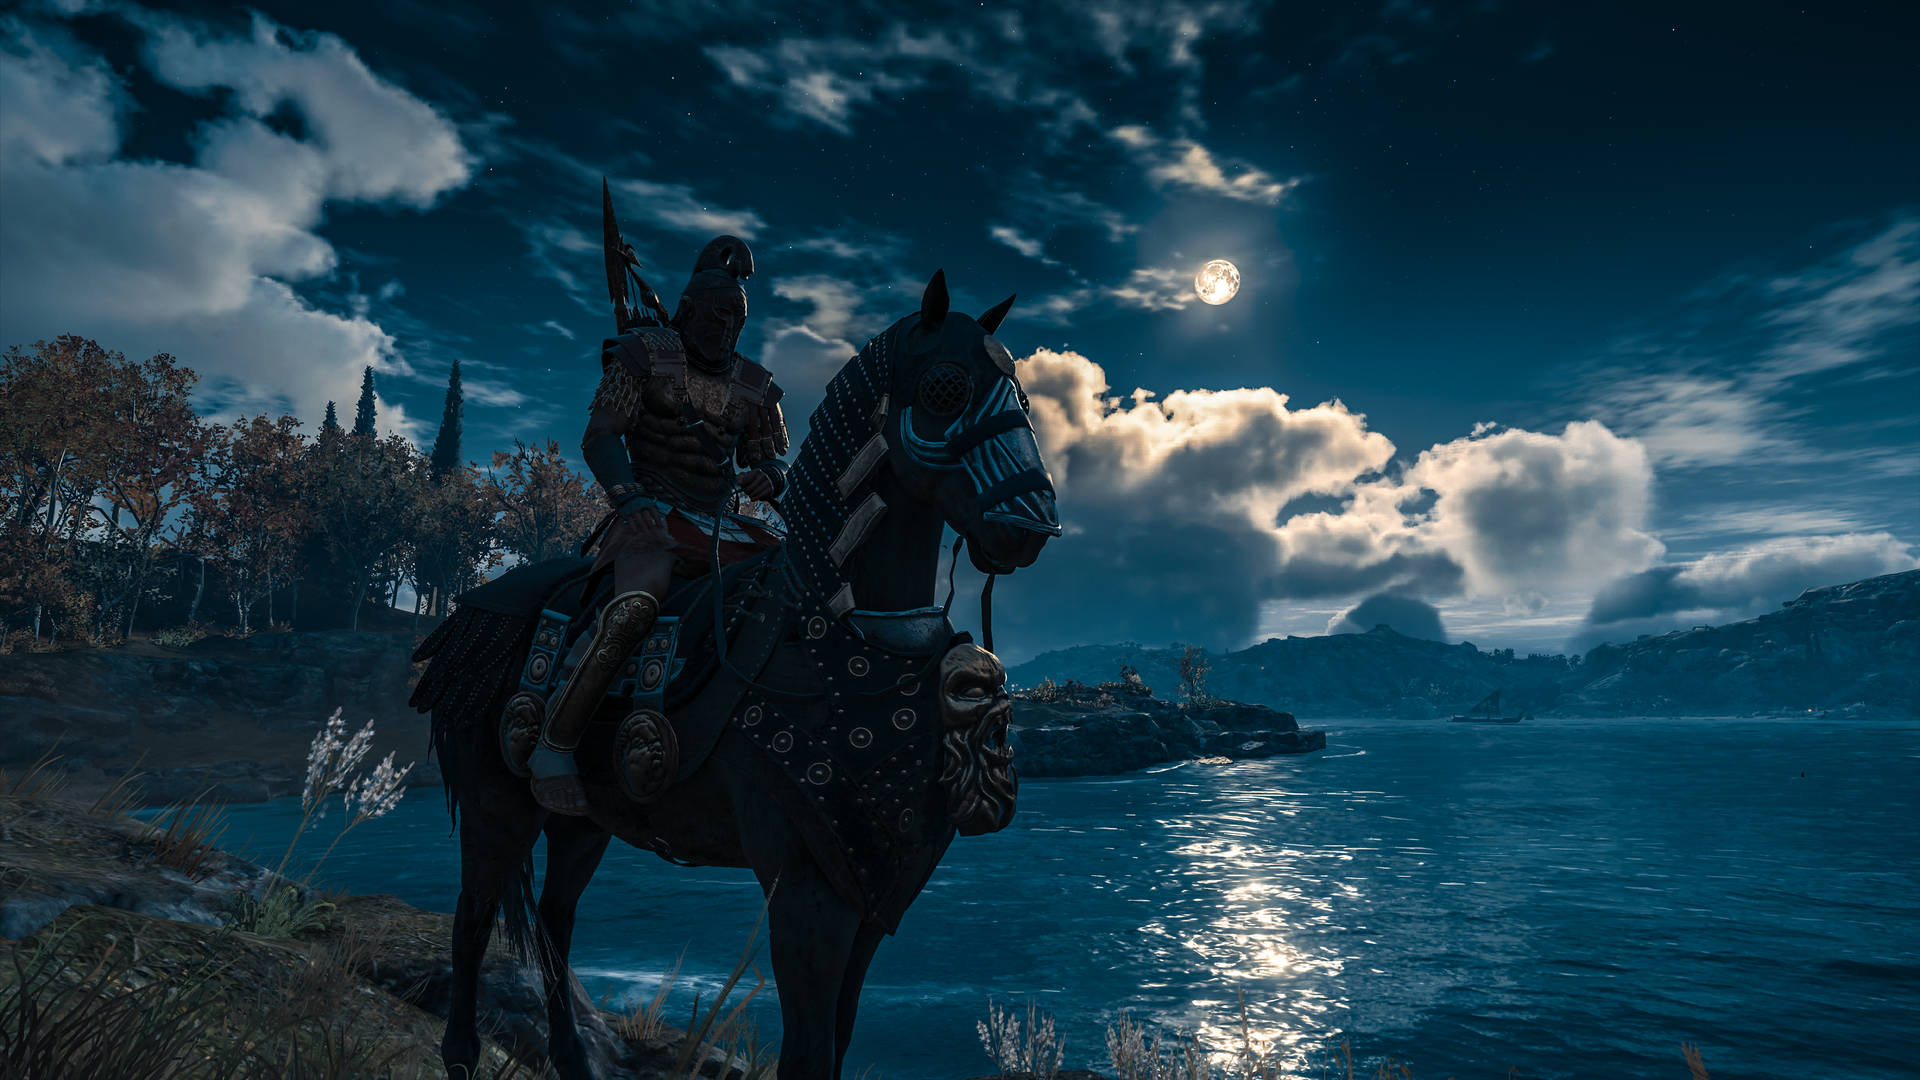 Assassin's Creed Odyssey Spartan Riding Horse Wallpaper